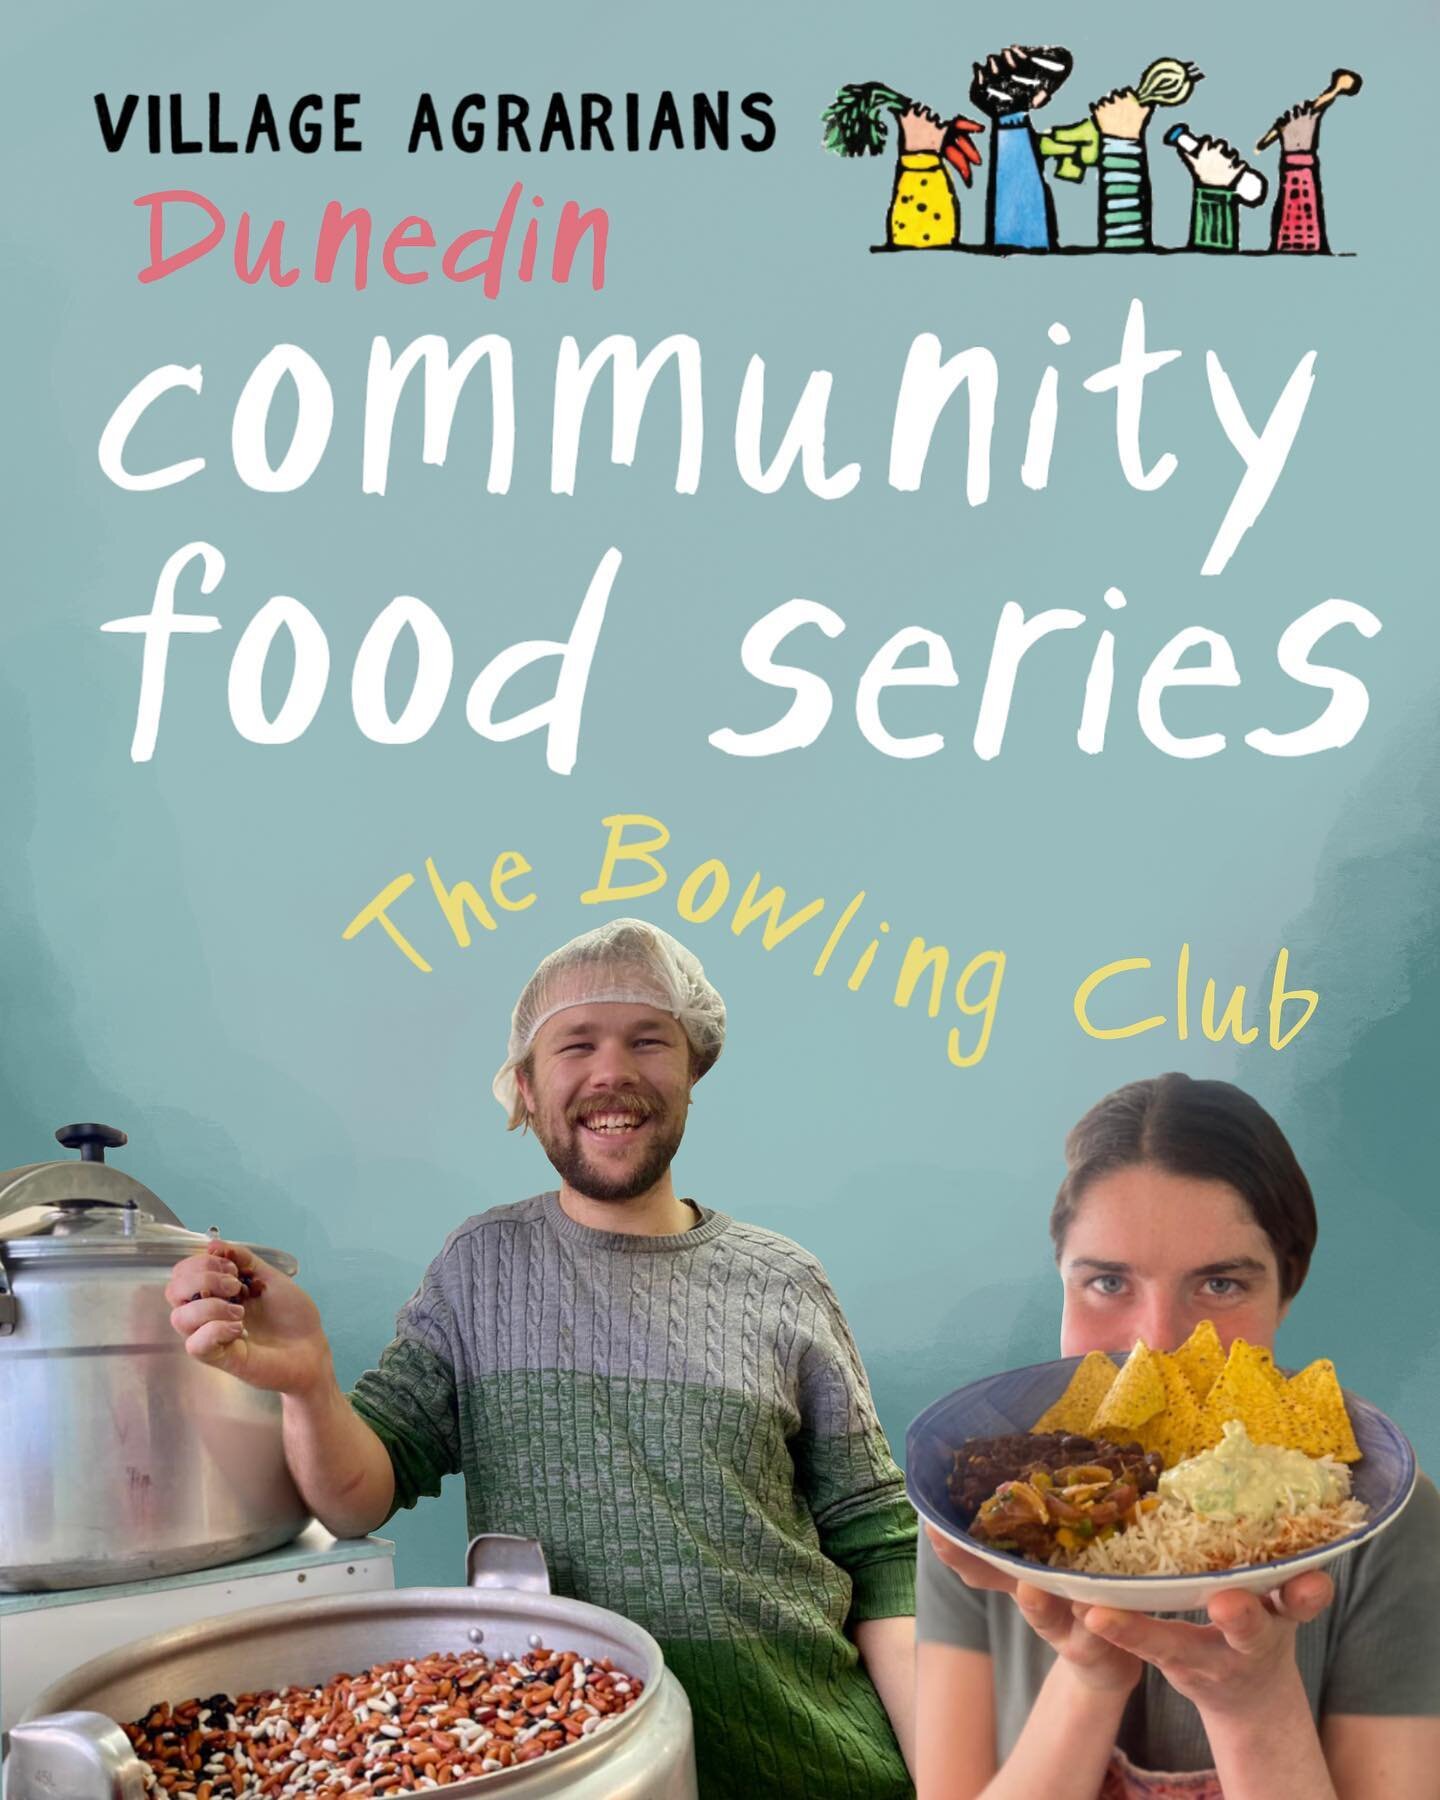 This spring, in our Community Food Series, we are lucky to be able to highlight these good 4 young folk from 2 different parts of the community food system in Dunedin! 

The Bowling Club is an eatery in Caversham, Ōtepoti Dunedin, where meals cost $4